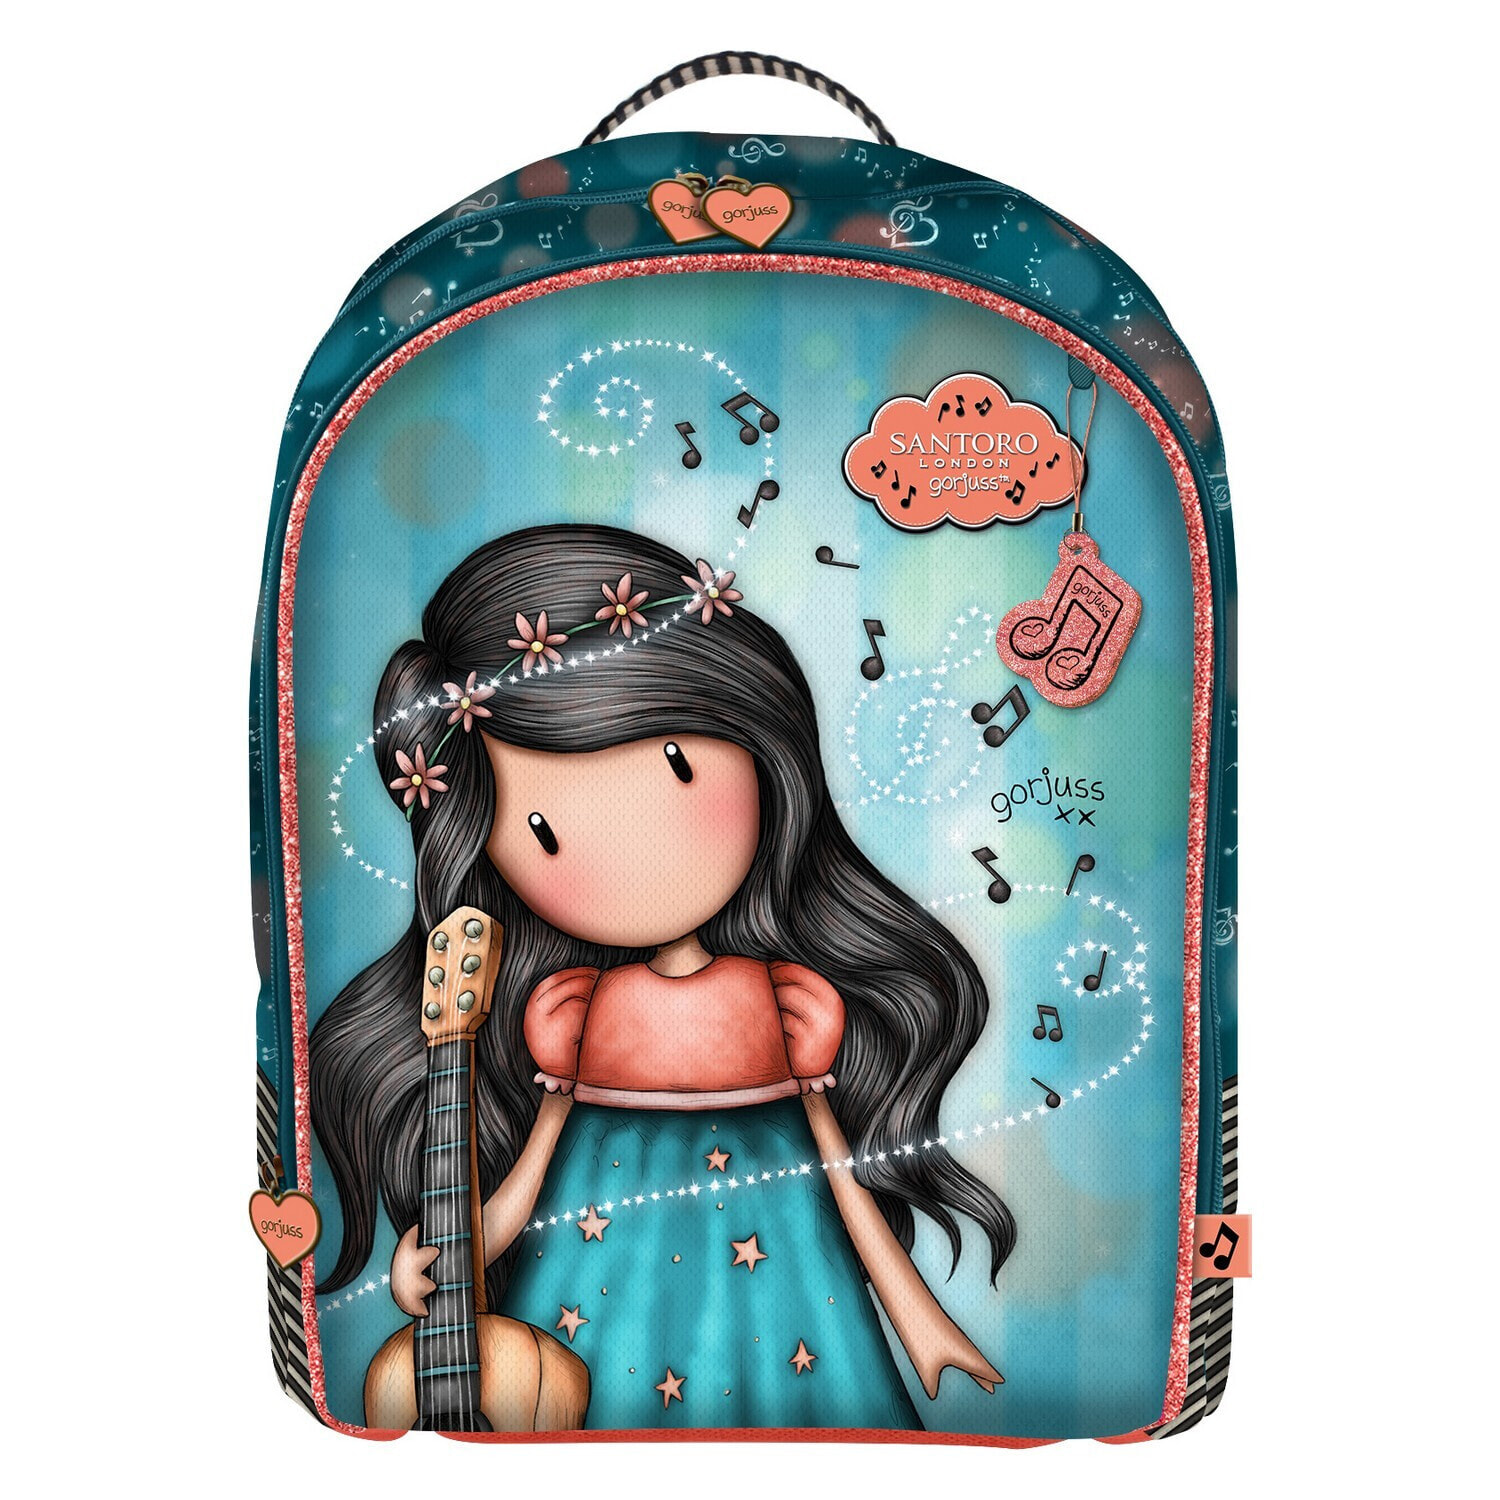 School Bag This One's for You Gorjuss M572A Turquoise (32 x 45 x 13.5 cm)